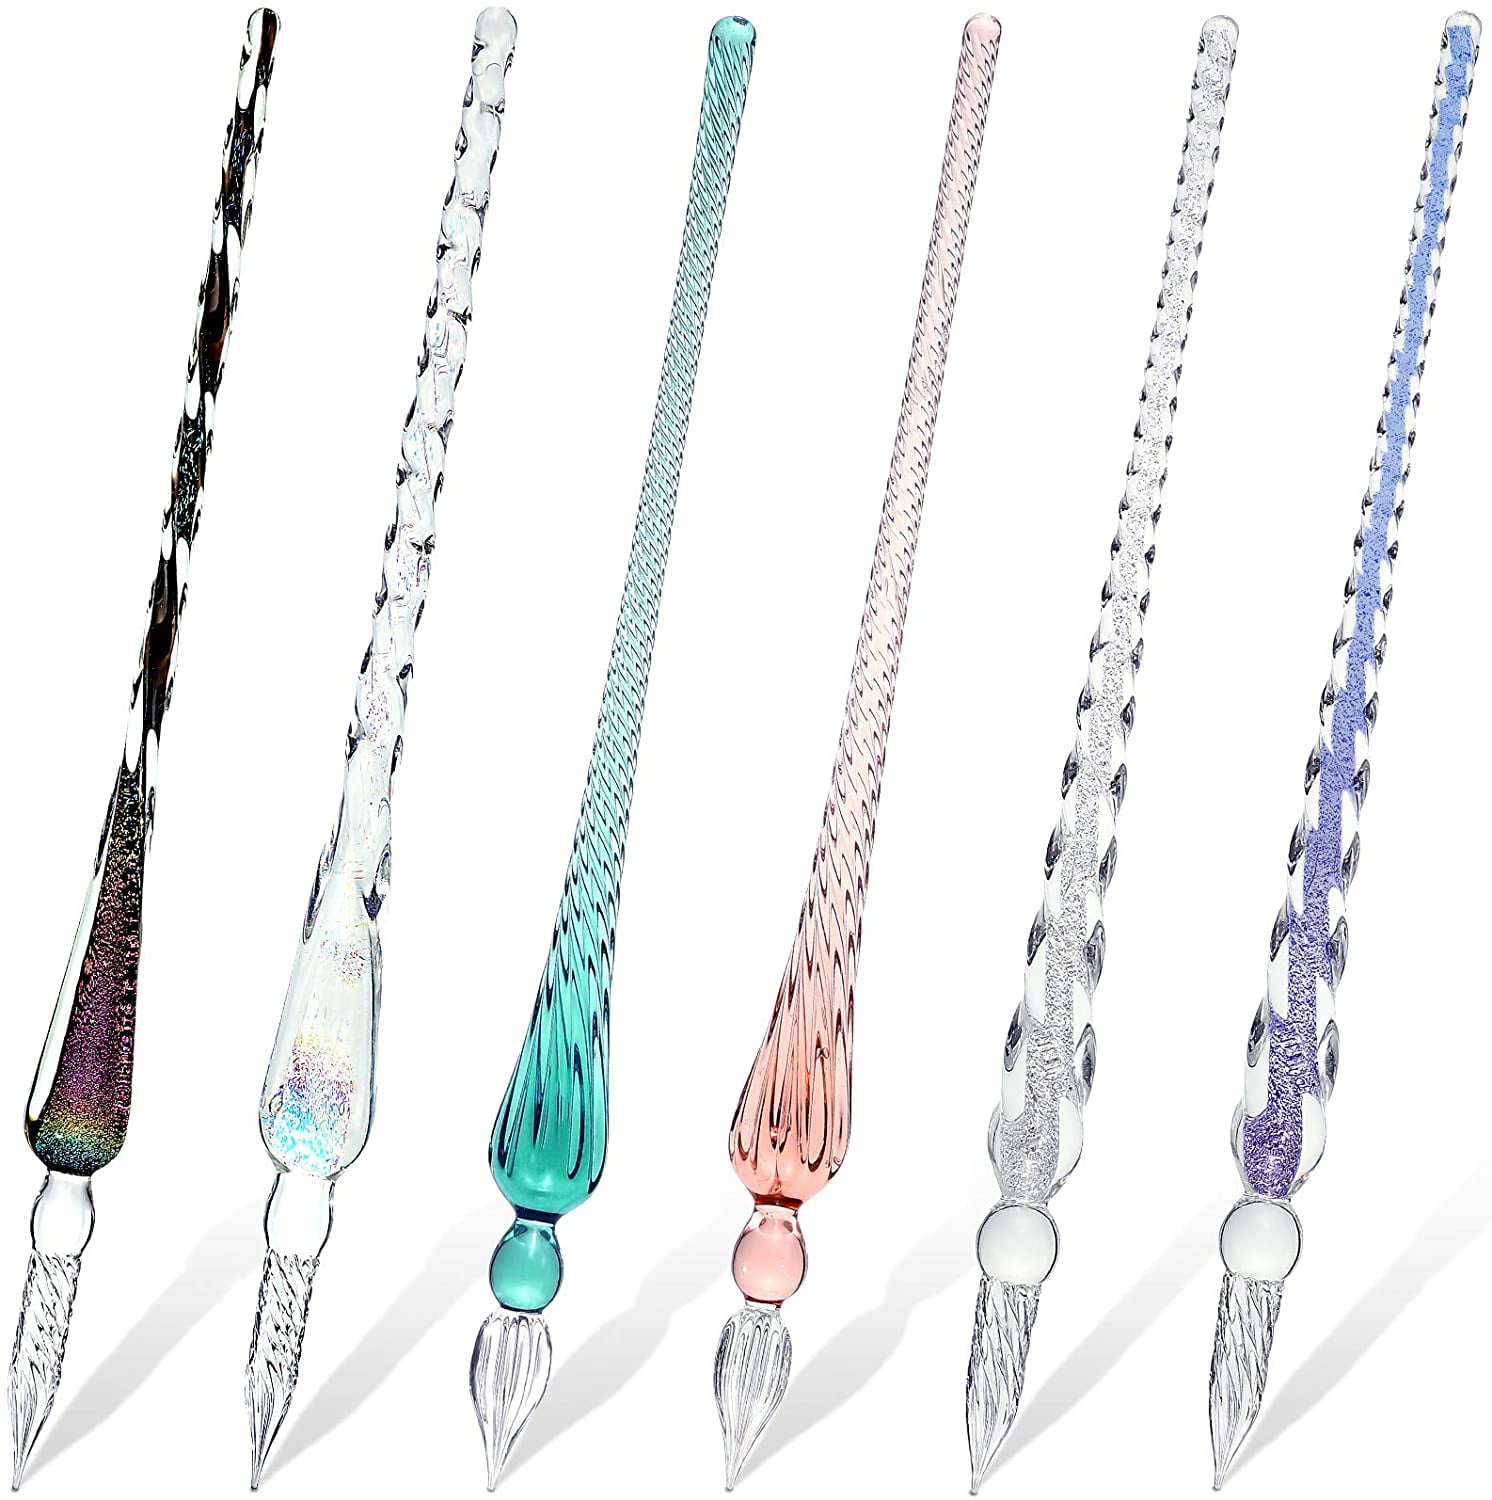 6 Pieces Handmade Glass Dip Pen Silvery, Ink Blue, Ice Green, Green, Blue, Pink High Borosilicate Glass Crystal Dip Pen Glass Signature Pen for Writing Drawing Calligraphy Decorations Presents